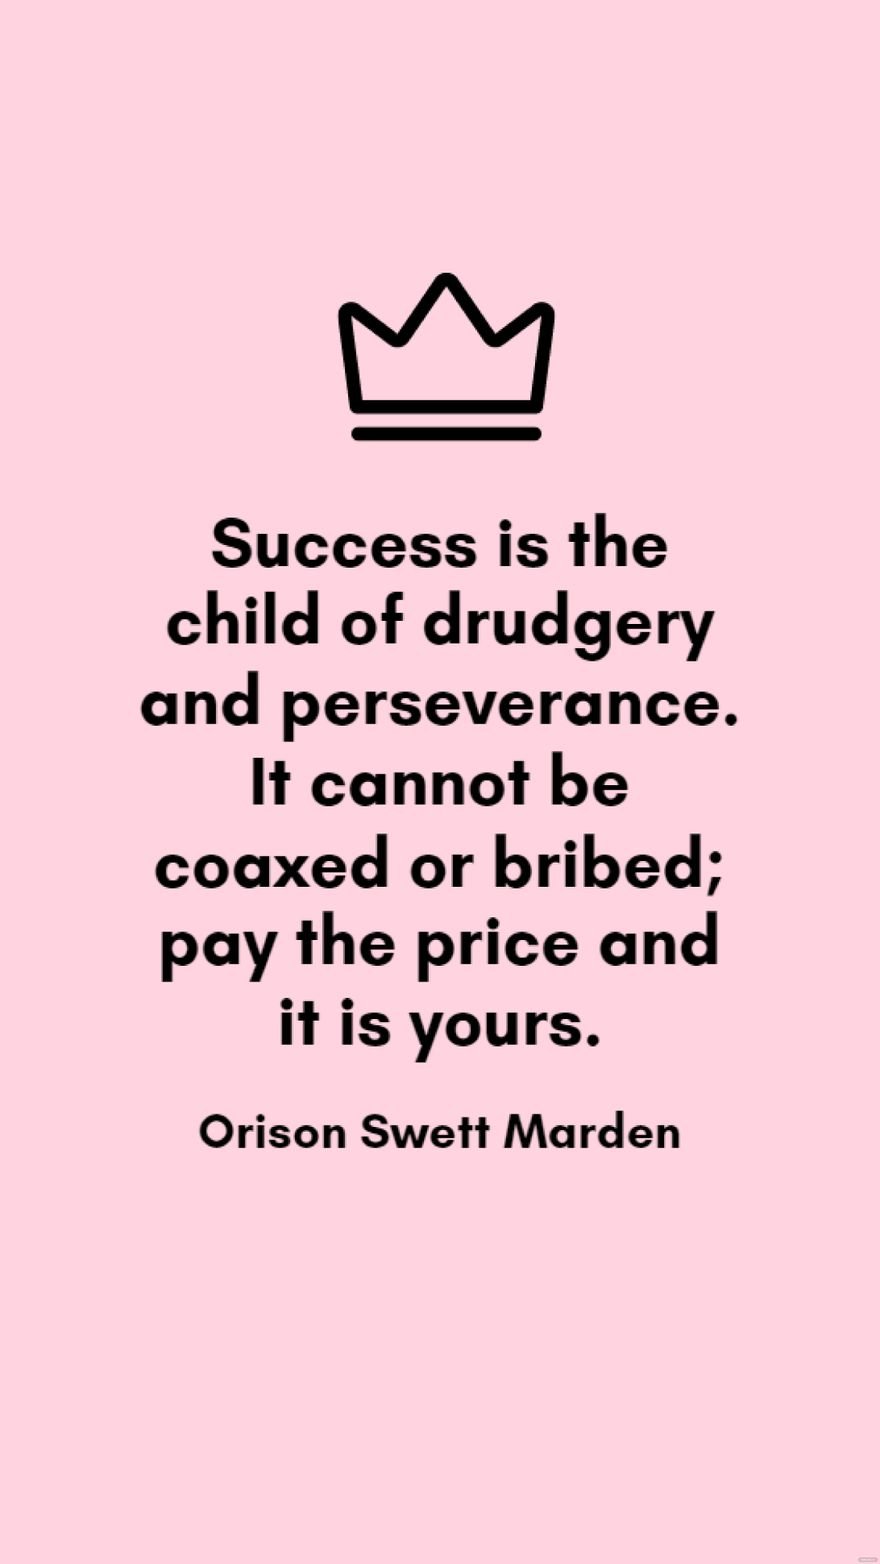 Orison Swett Marden - Success is the child of drudgery and perseverance. It cannot be coaxed or bribed; pay the price and it is yours.